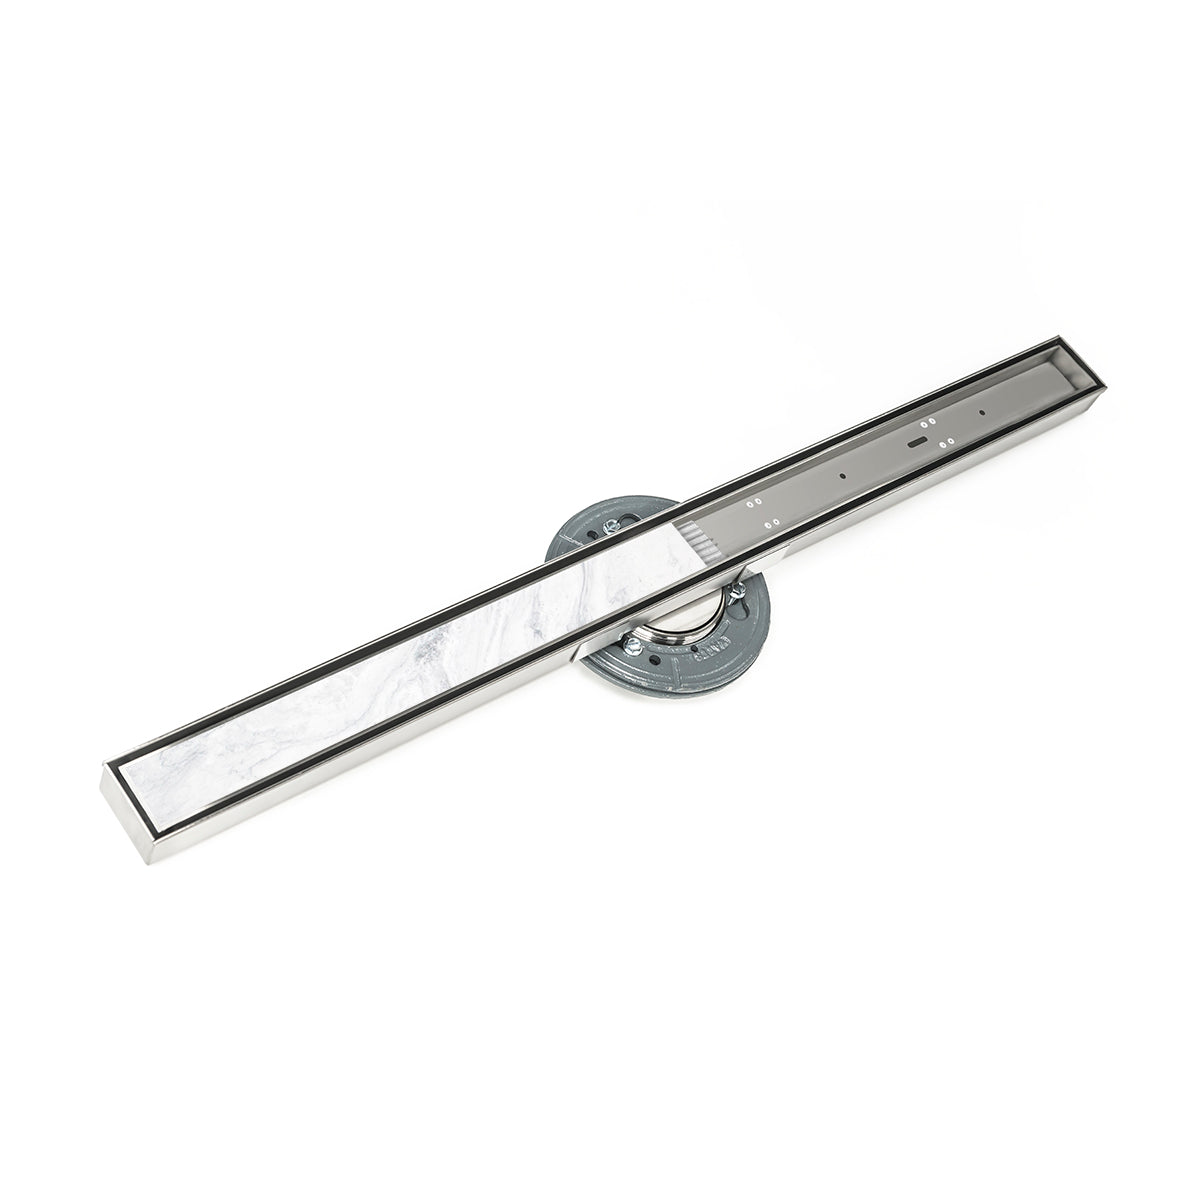 Infinity Drain 96" S-Stainless Steel Series High Flow Site Sizable Linear Drain Kit with Tile Insert Frame with Cast Iron Drain Body, 3" No Hub Outlet